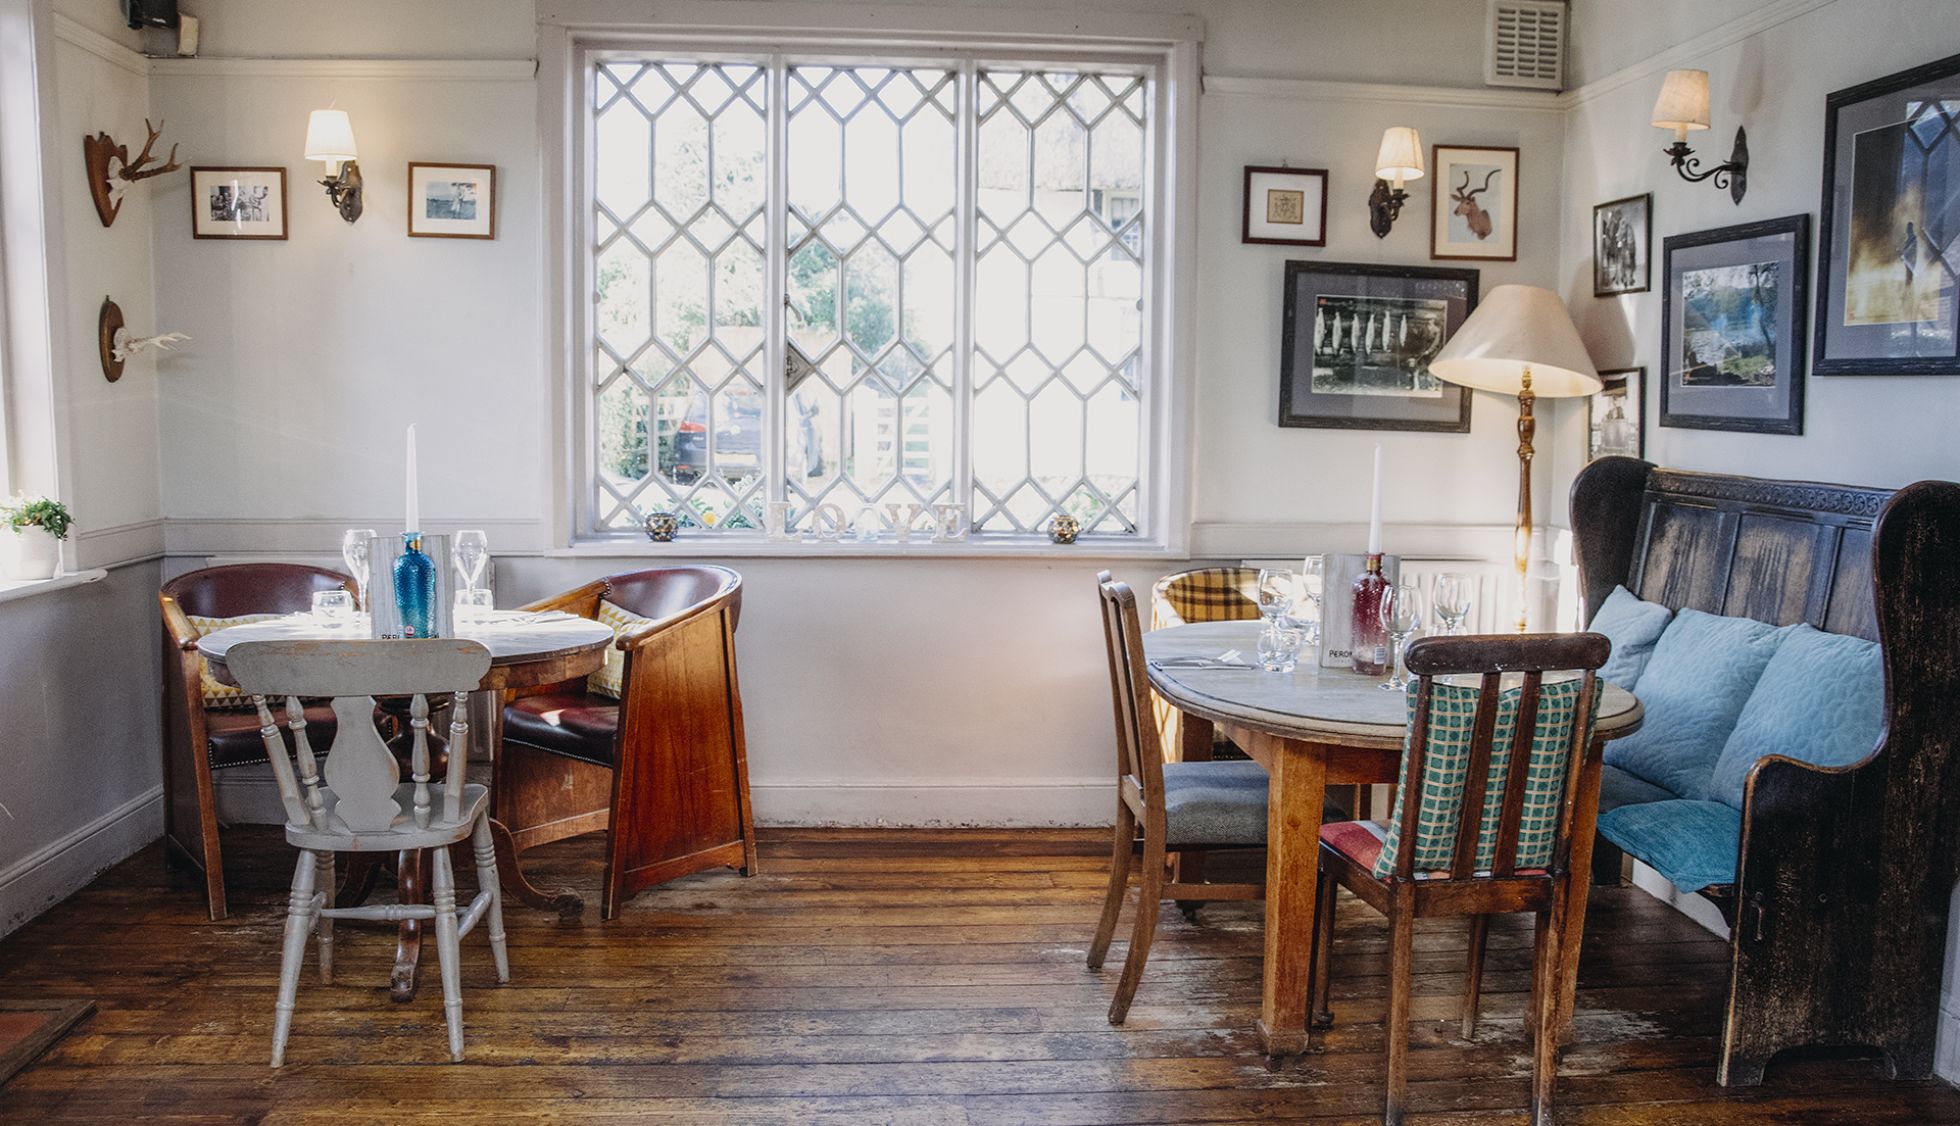 Peat Spade Stockbridge: 5 of The Most Gorgeous Shops and Pubs to Visit in Stockbridge